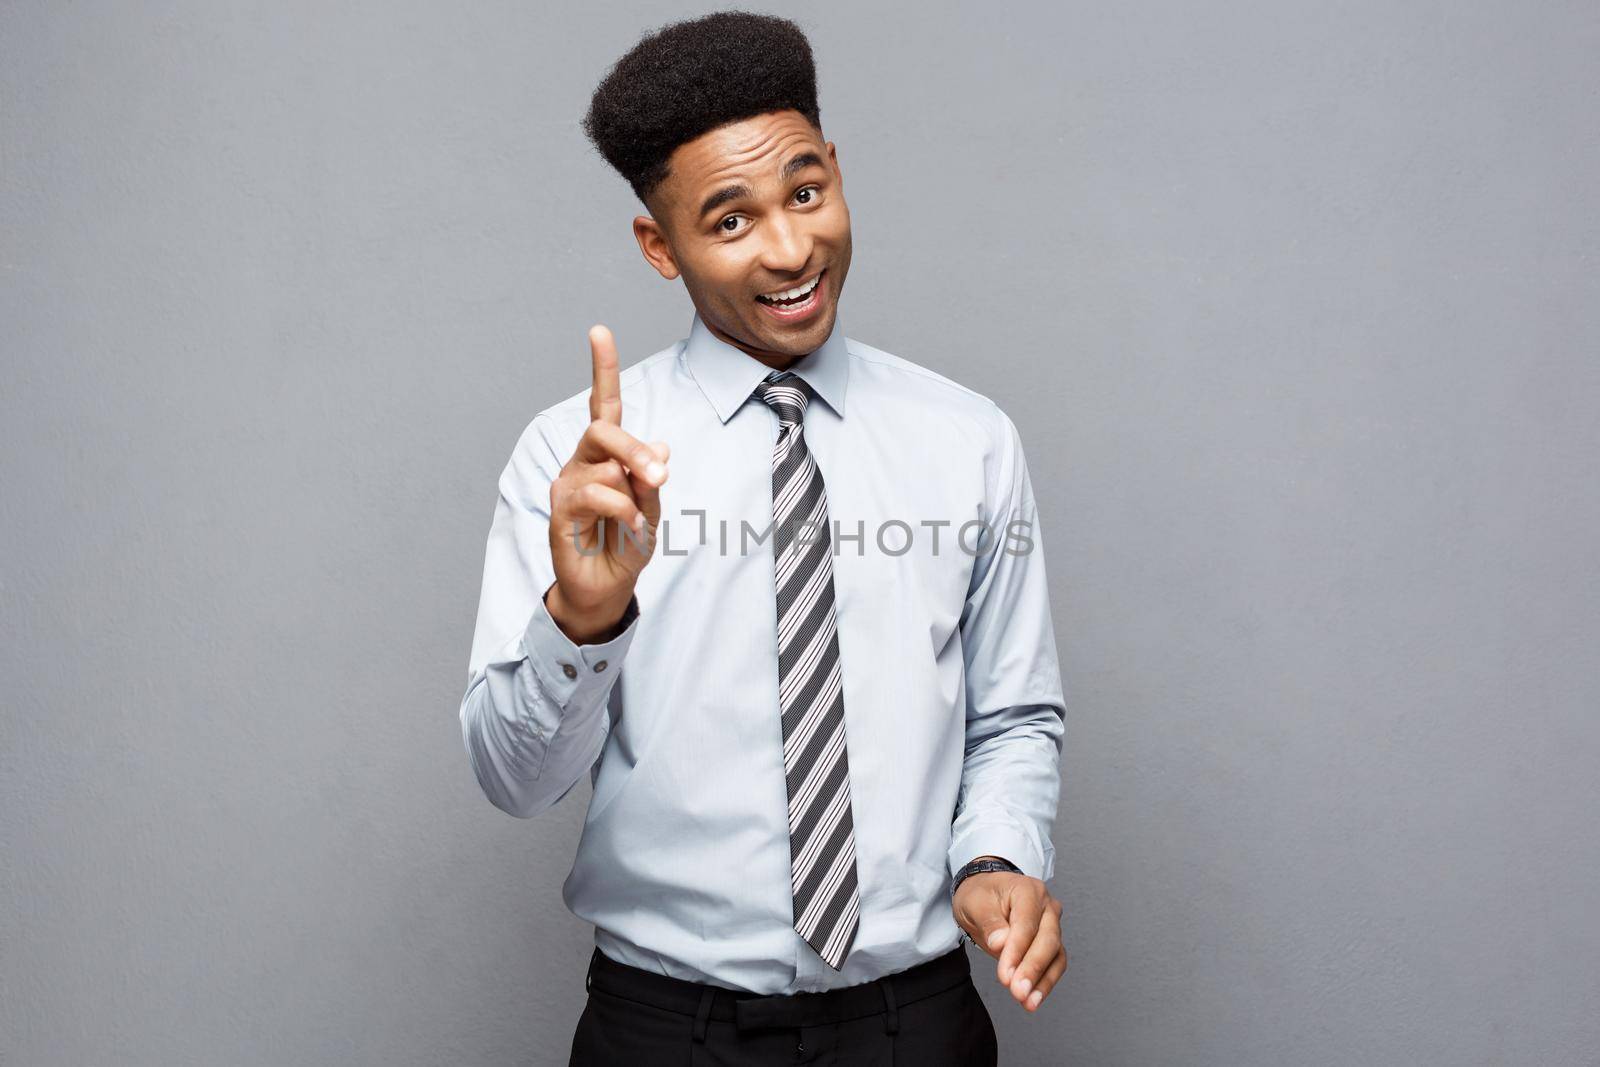 Business Concept - portrait of African American holding one fingers sign